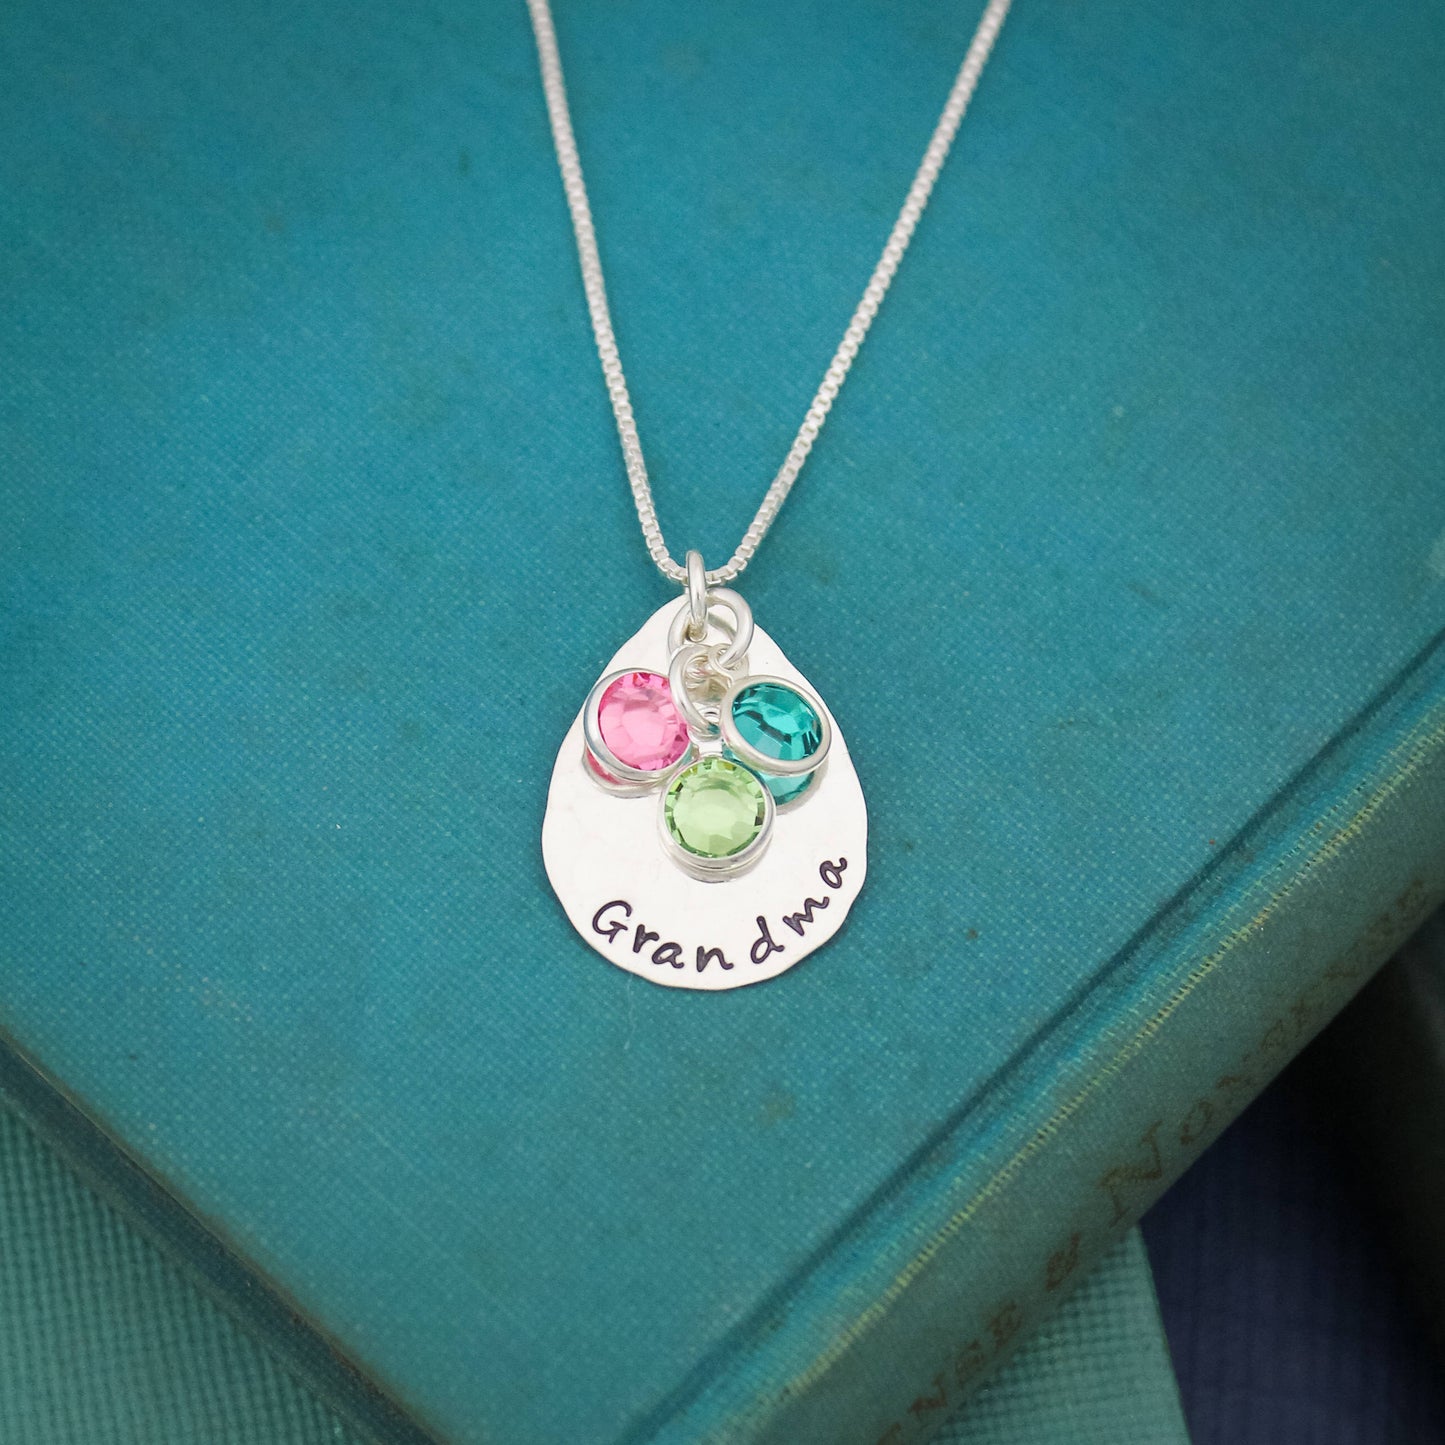 Personalized Grandmother Birthstone Necklace, Mom Mom Necklace, Birthstone Necklace, Grandchildren Necklace, Hand Stamped Personalized